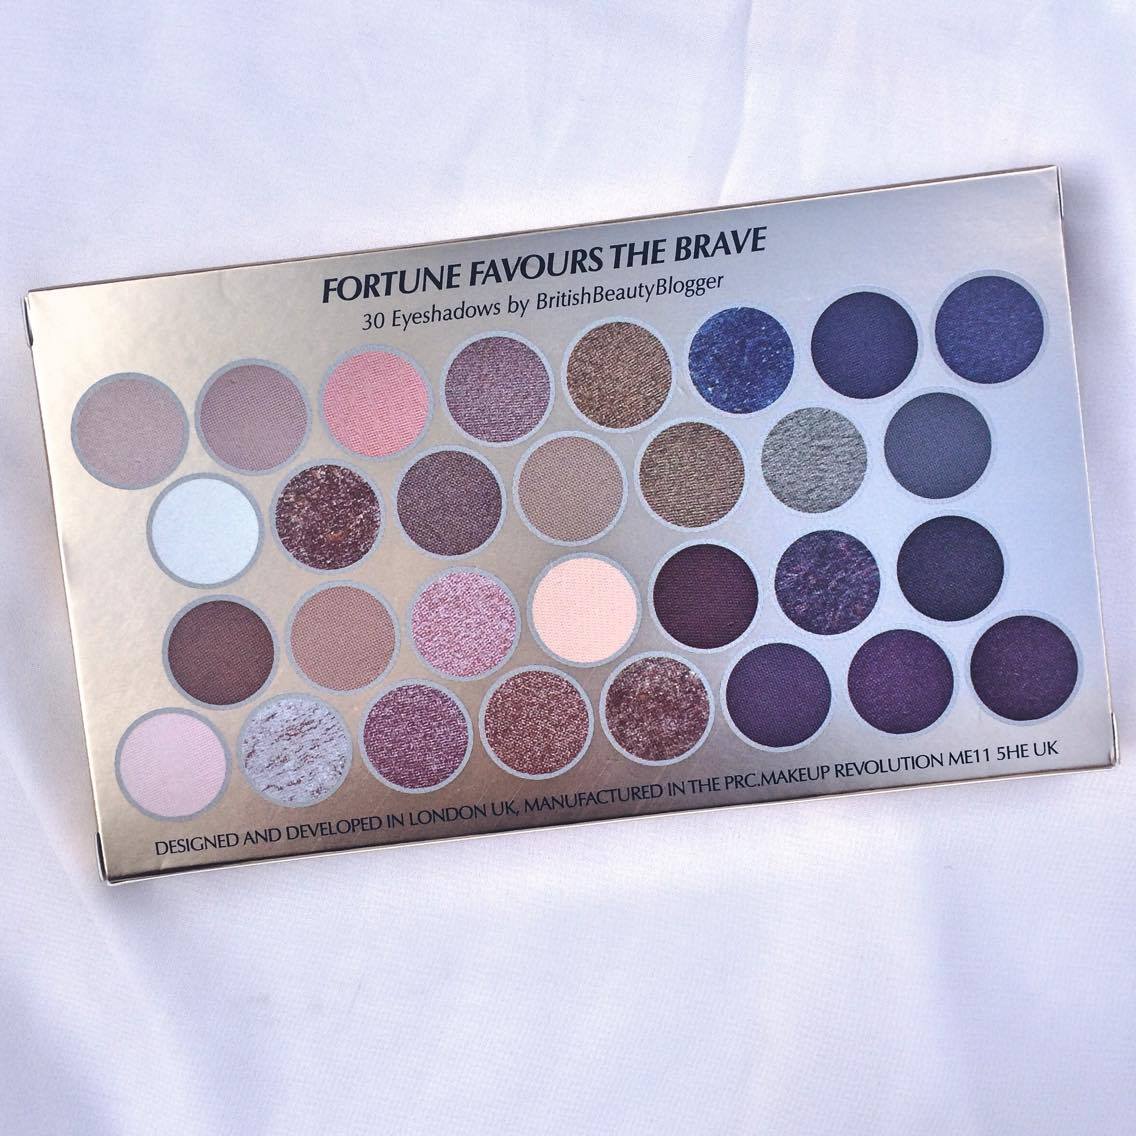 REVIEW & SWATCHES MAKEUP REVOLUTION & BRITISH BEAUTY BLOGGER 'FORTUNE FAVOURS THE BRAVE' COLLBABORATION |